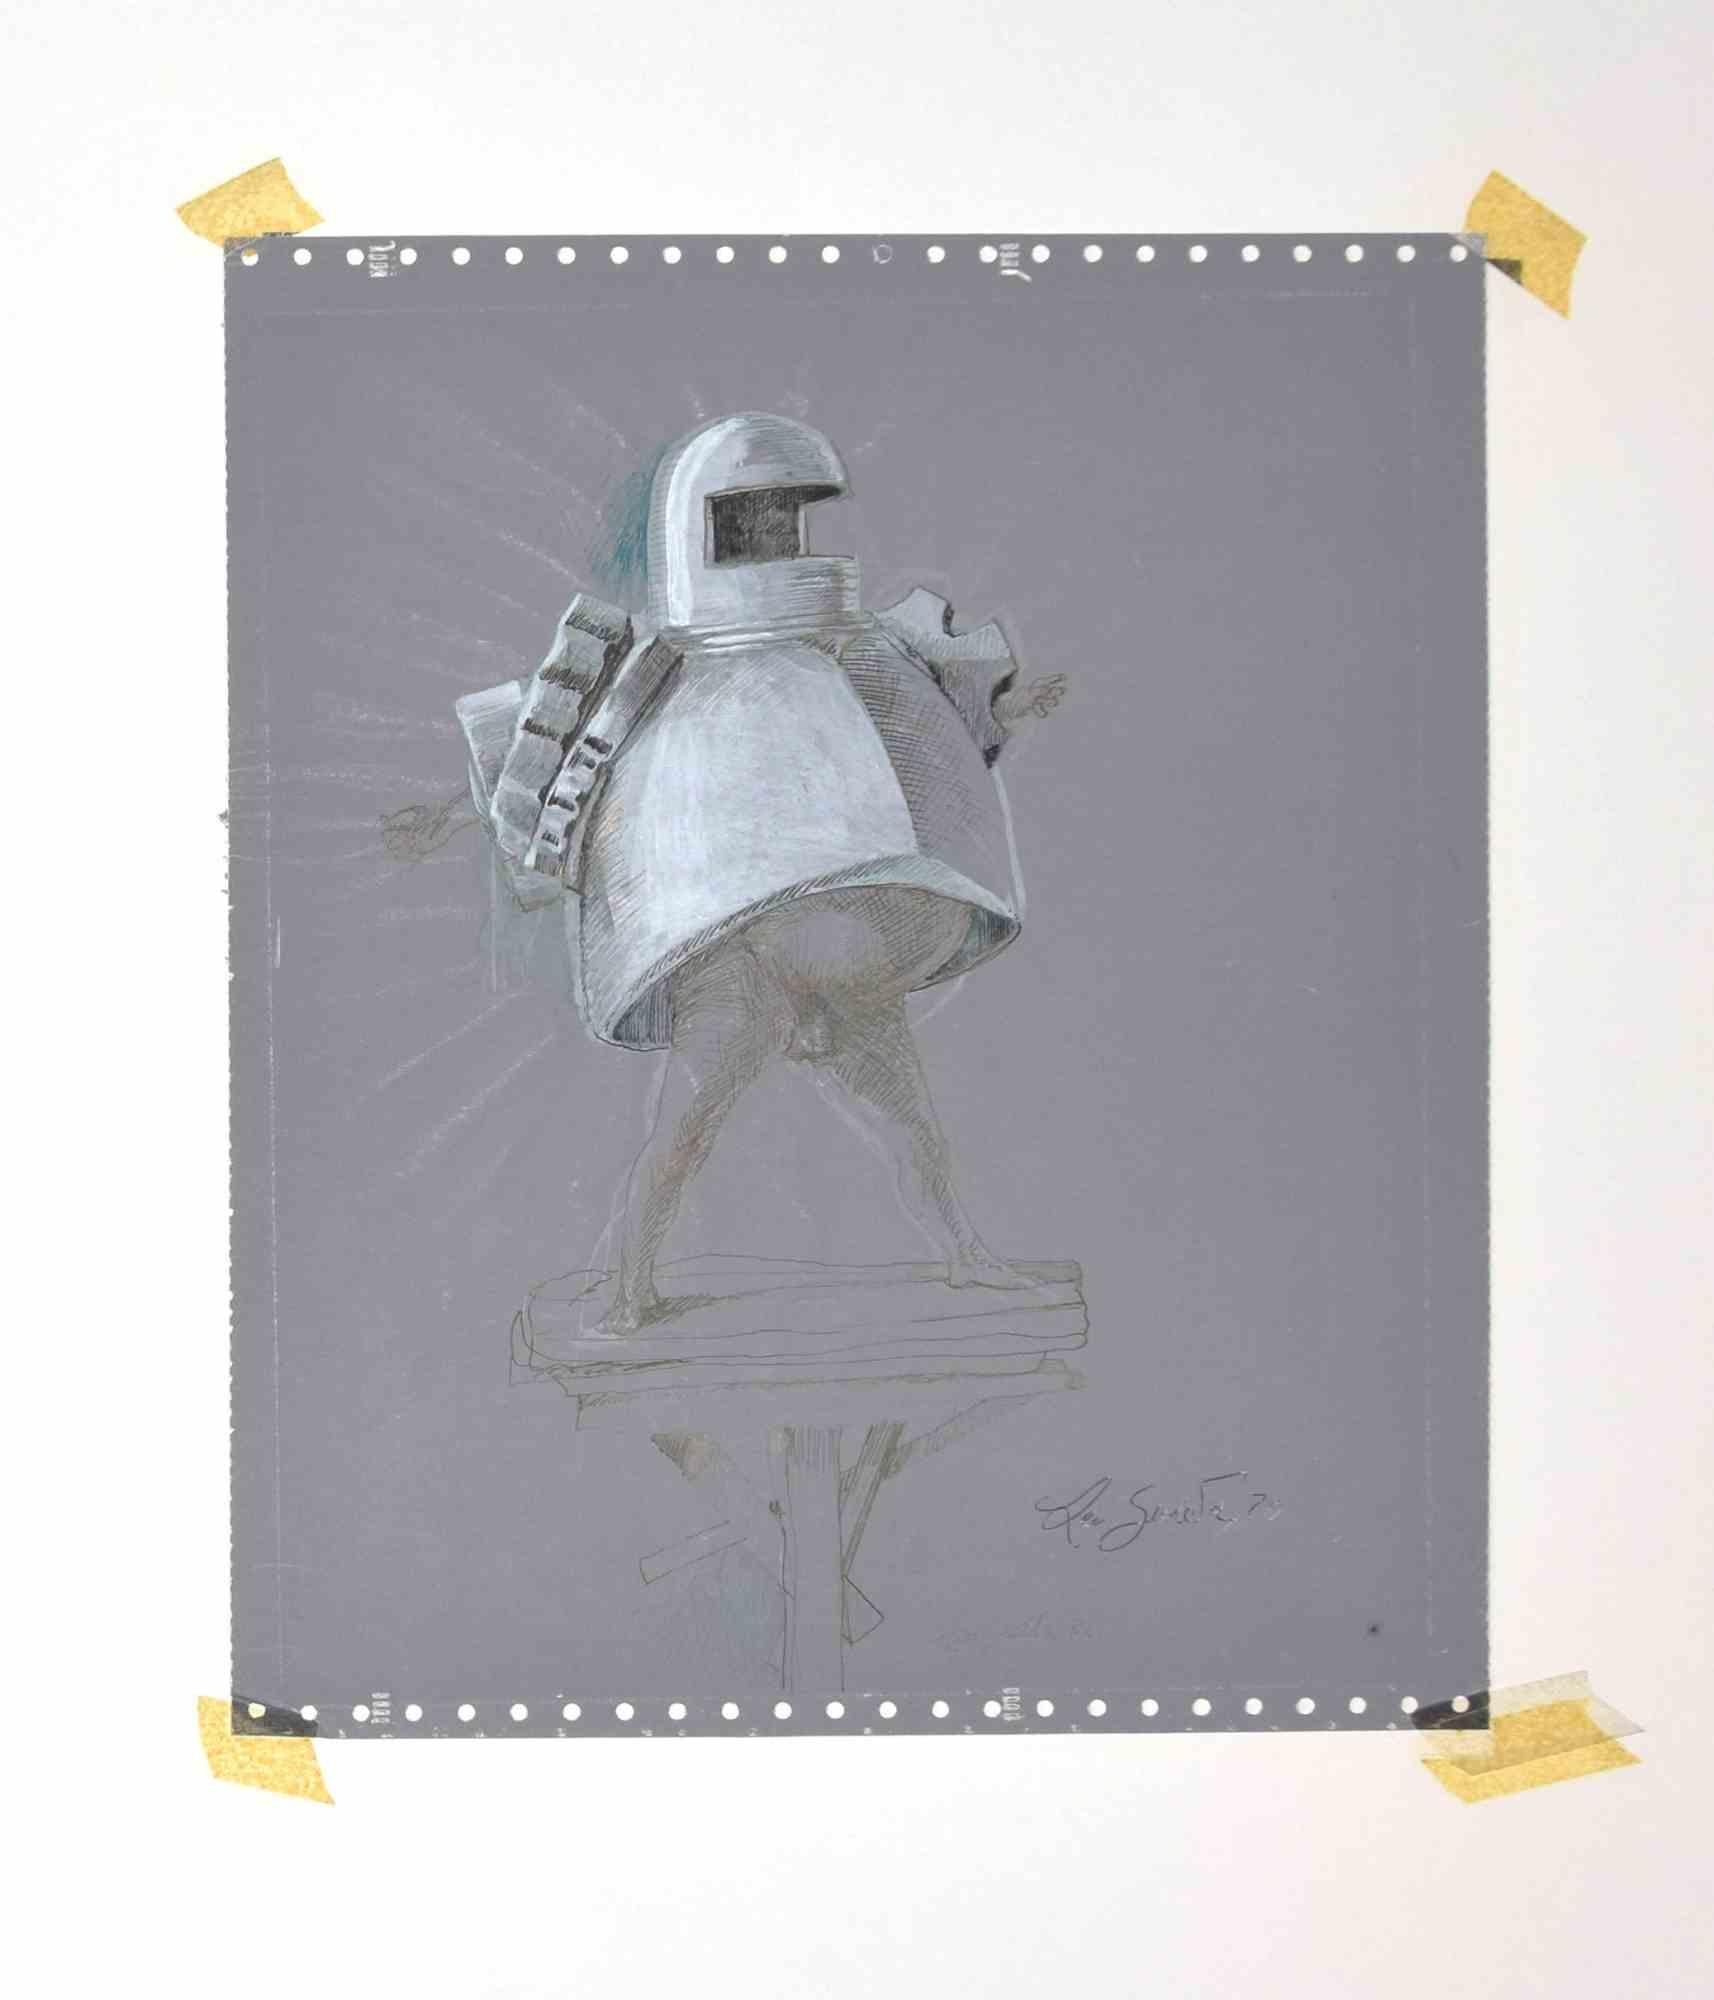 Knight is an original drawing in china ink, pencil and white lead realized by Leo Guida in 1970.

Good condition.

Leo Guida  (1992 - 2017). Sensitive to current issues, artistic movements and historical techniques, Leo Guida has been able to weave